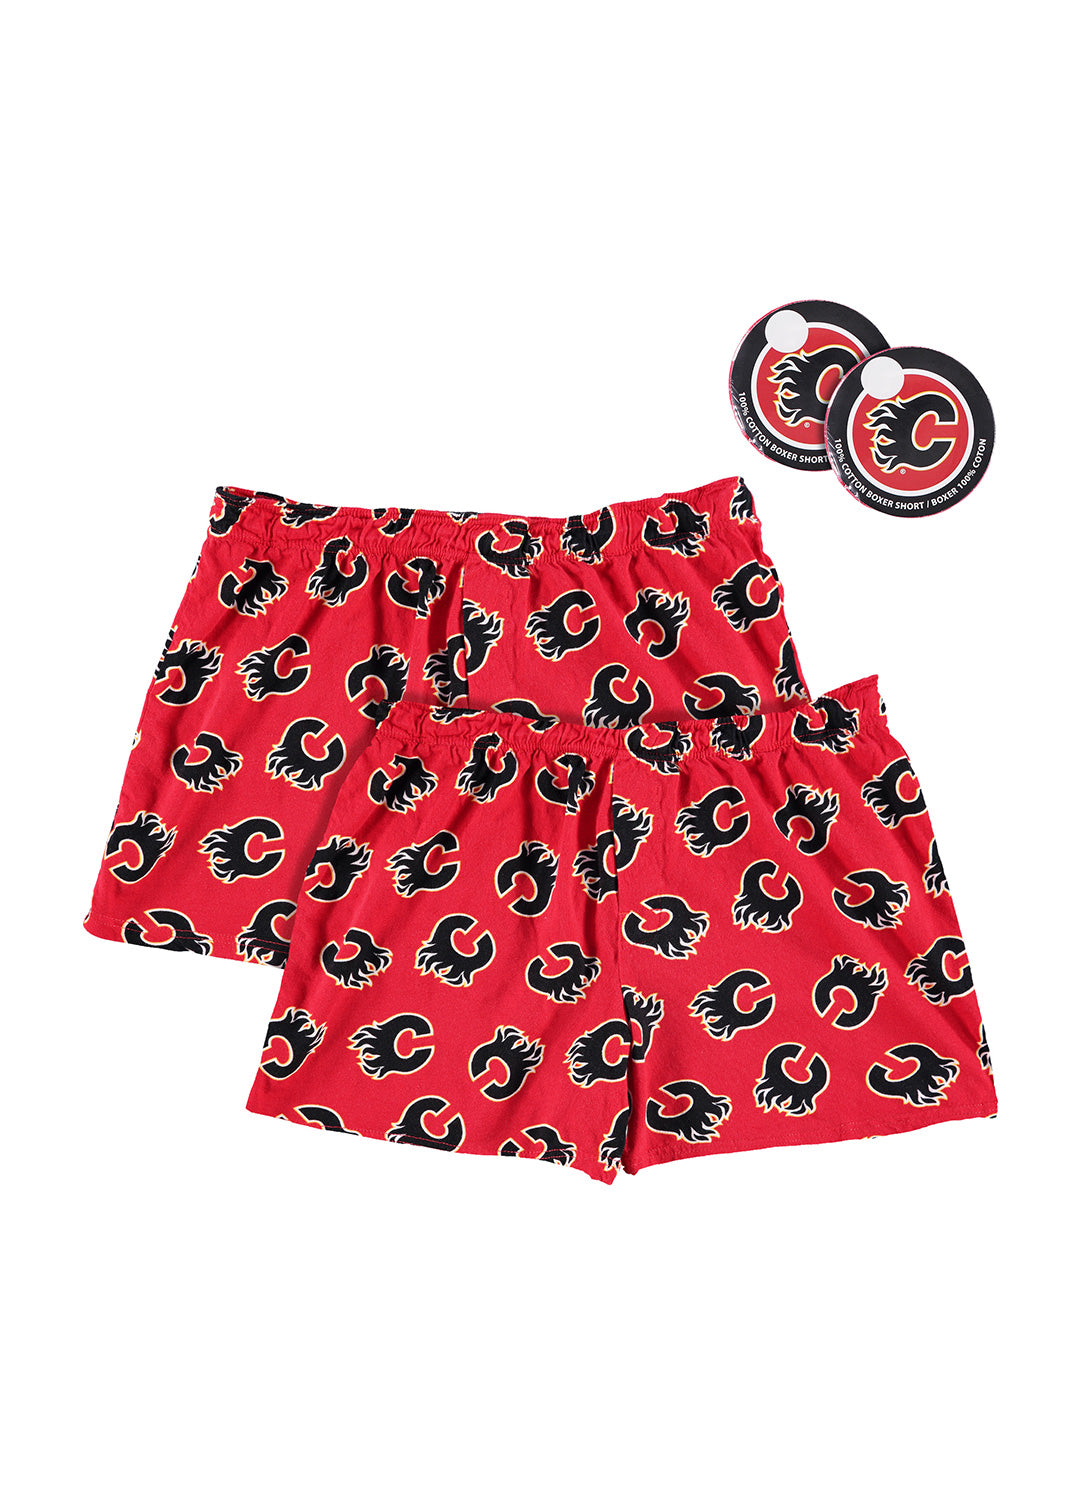 Mens 2 Calgary Flames Cotton Underwear and showing 2 Pack